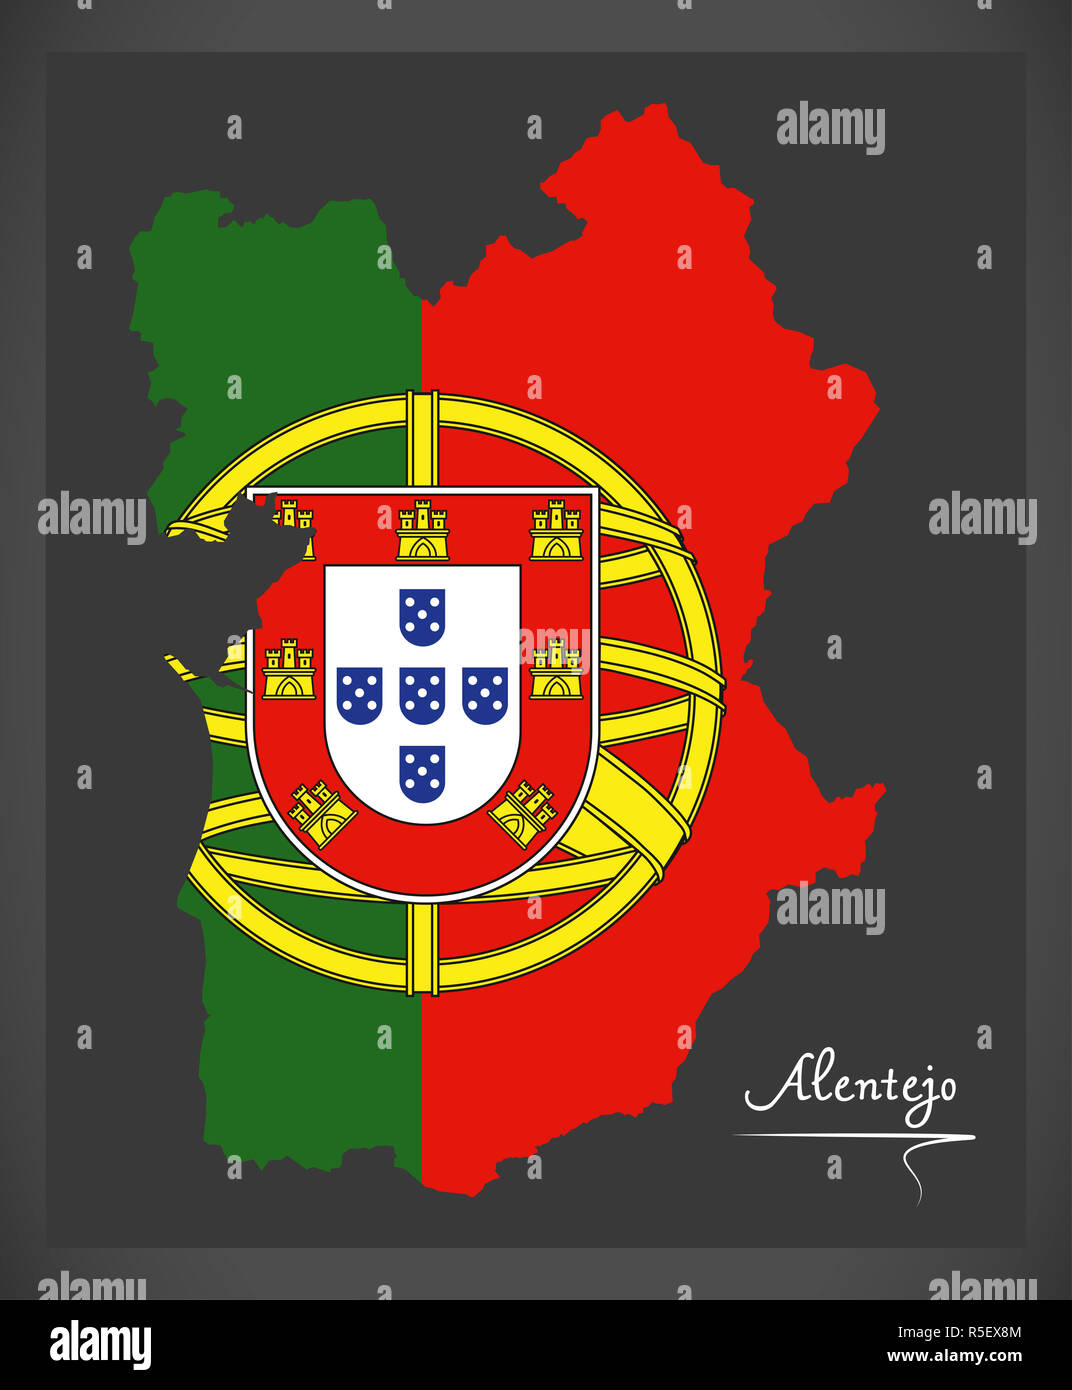 Alentejo Portugal map with Portuguese national flag illustration Stock Photo